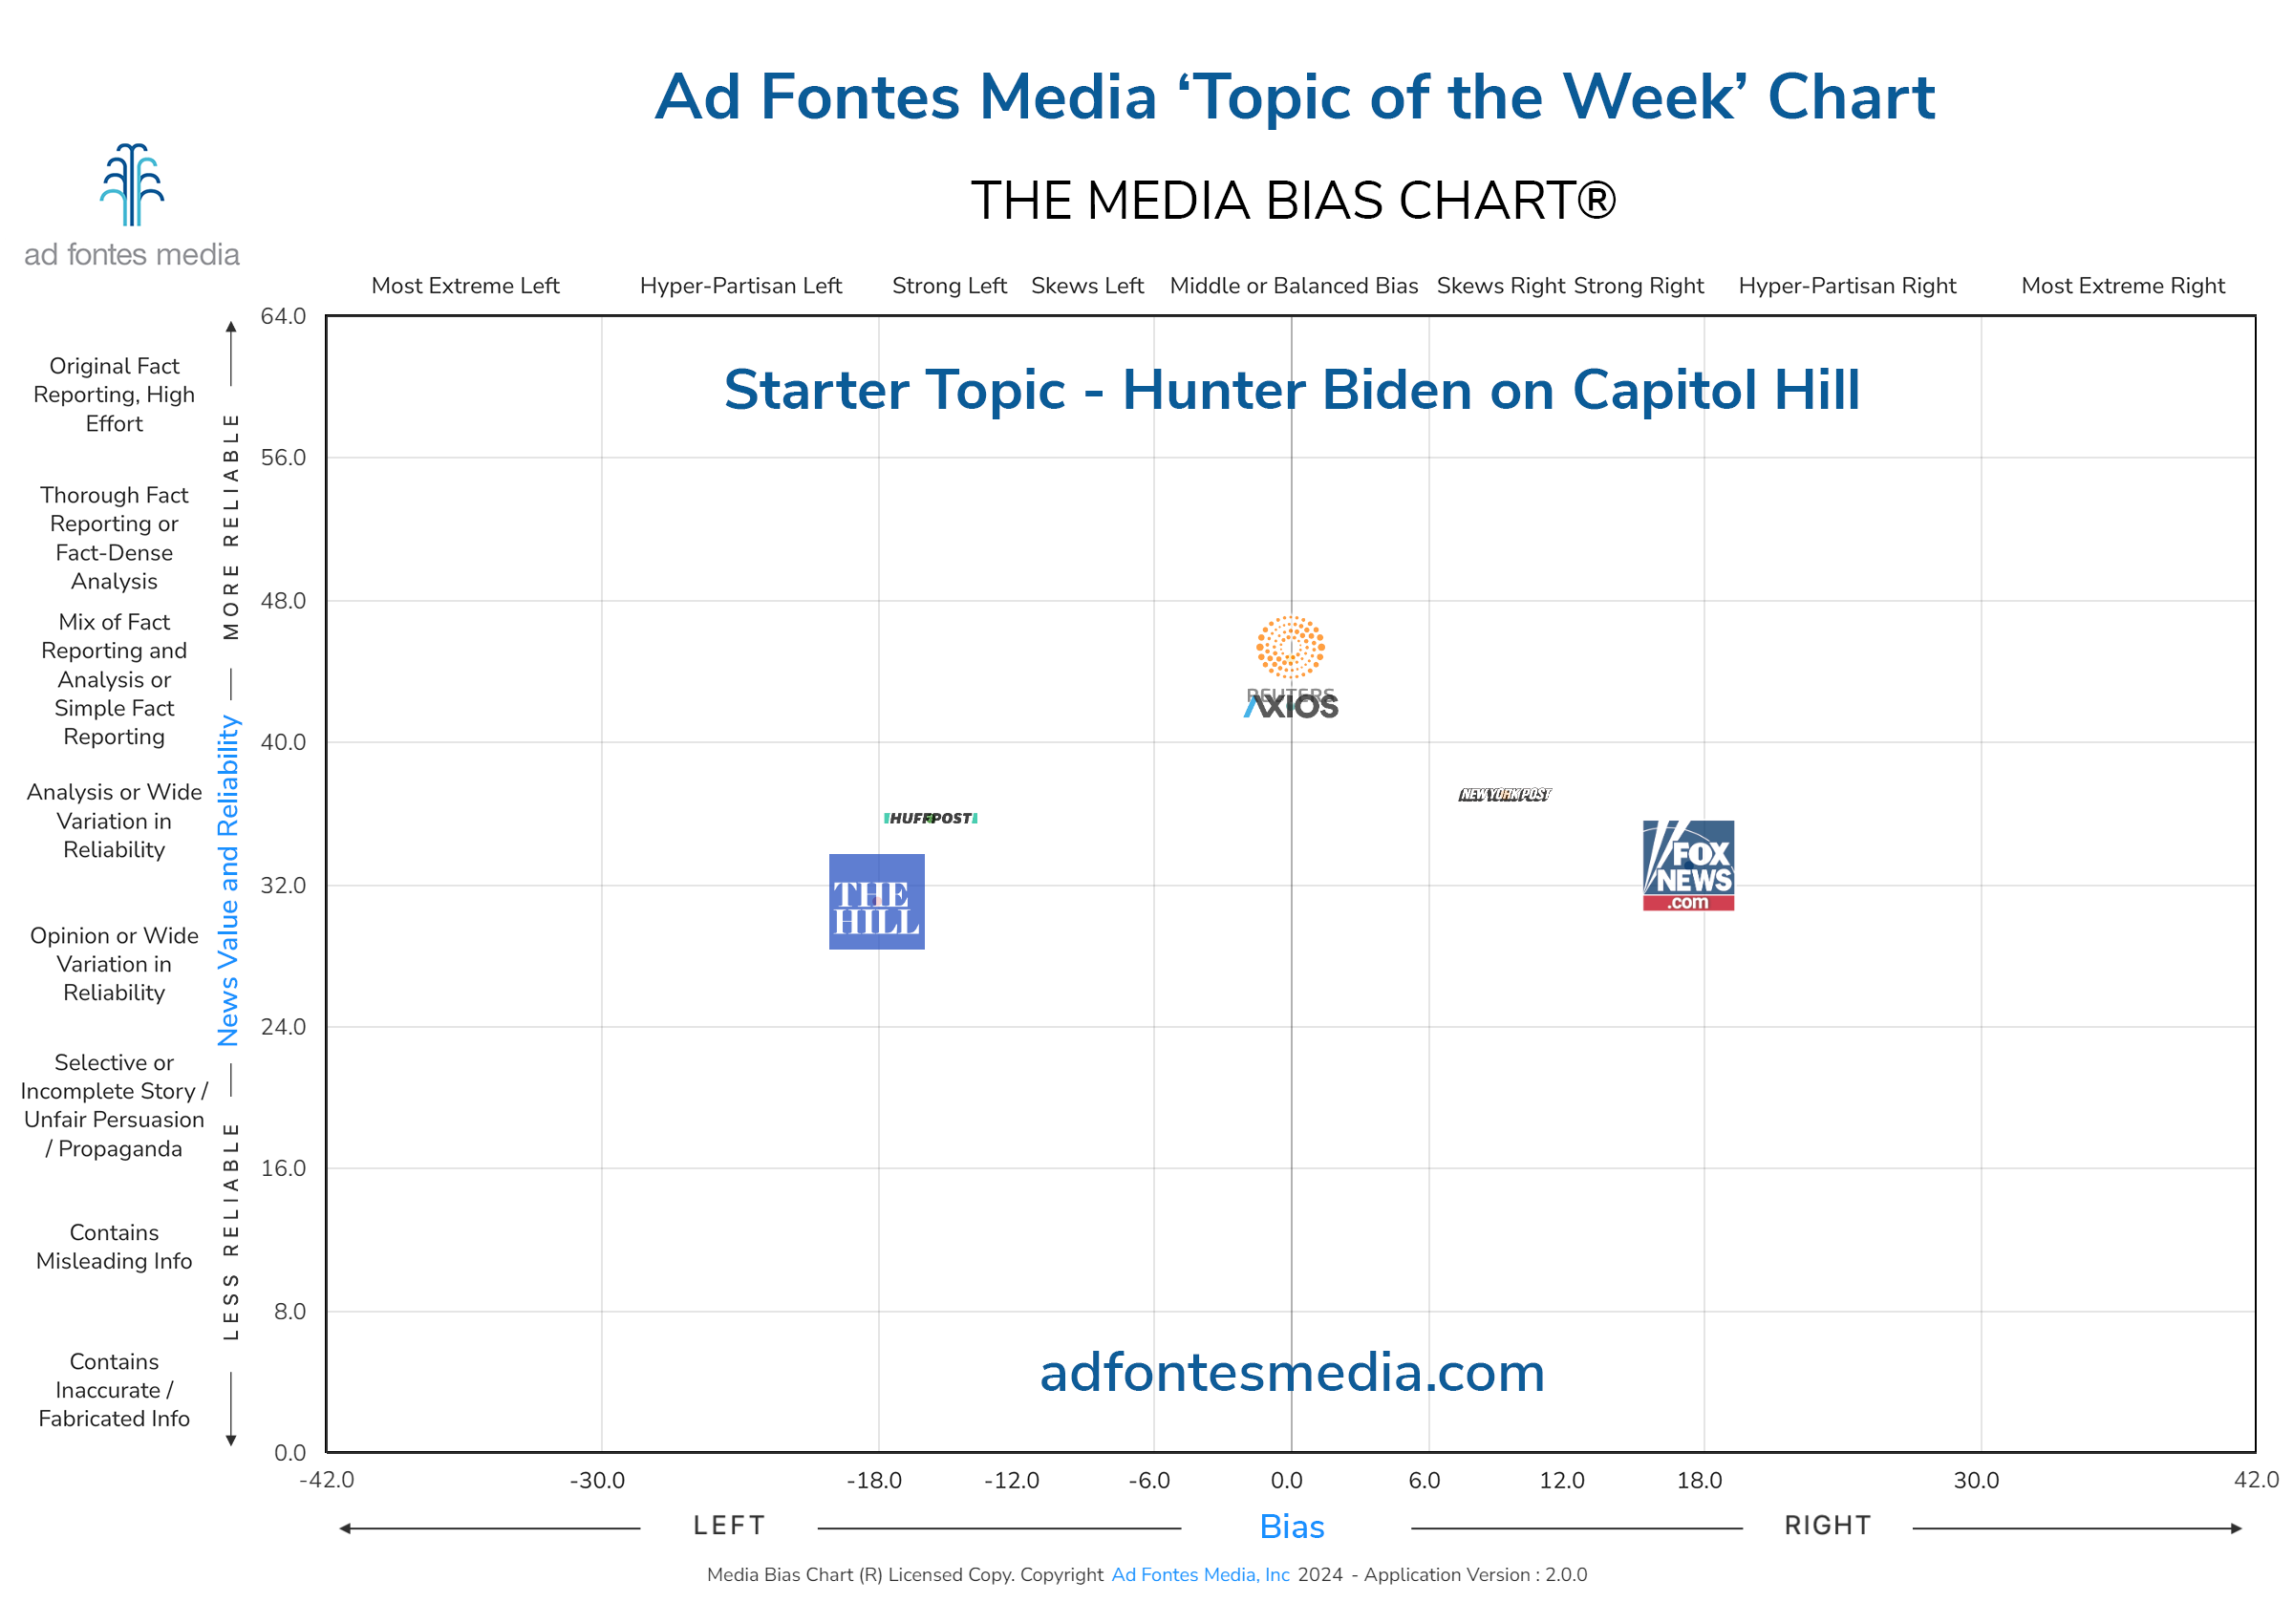 The Media Bias Chart examines the responses to Hunter Biden’s surprise appearance on Capitol Hill